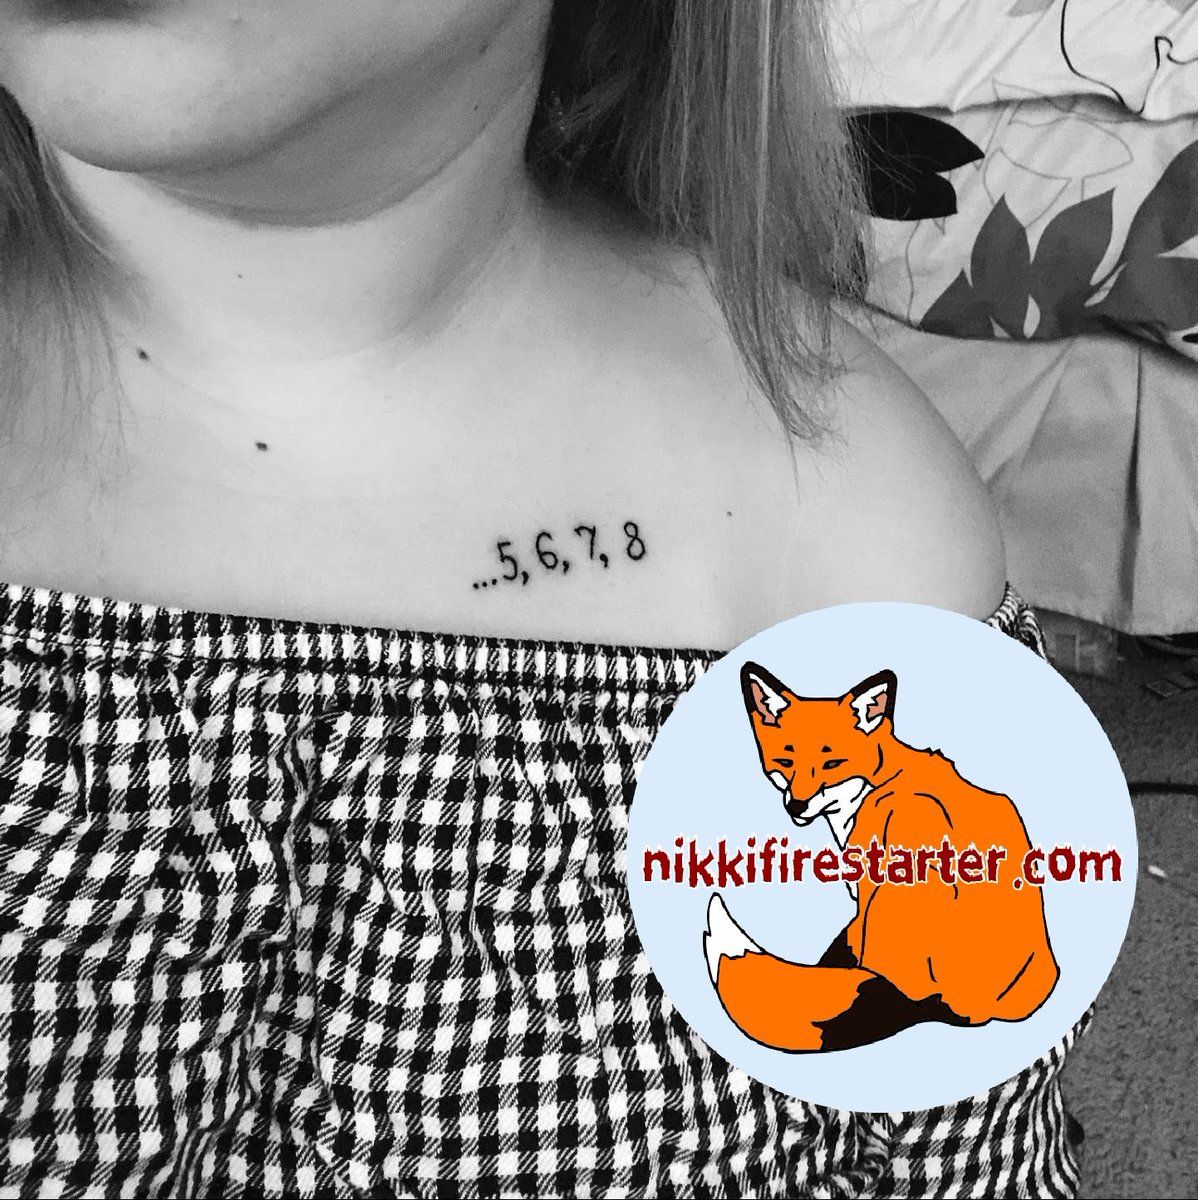 Small tattoo on collarbone. I forgot to take a picture of this one, so luckily she was awesome and sent one to me later! :^)

nikkifirestarter.com 

#minimalisttattoos #smalltattoos #collarbonetattoos #texttattoos #numbertattoos #blacktattoos #blackink #ink #linework #tattoos